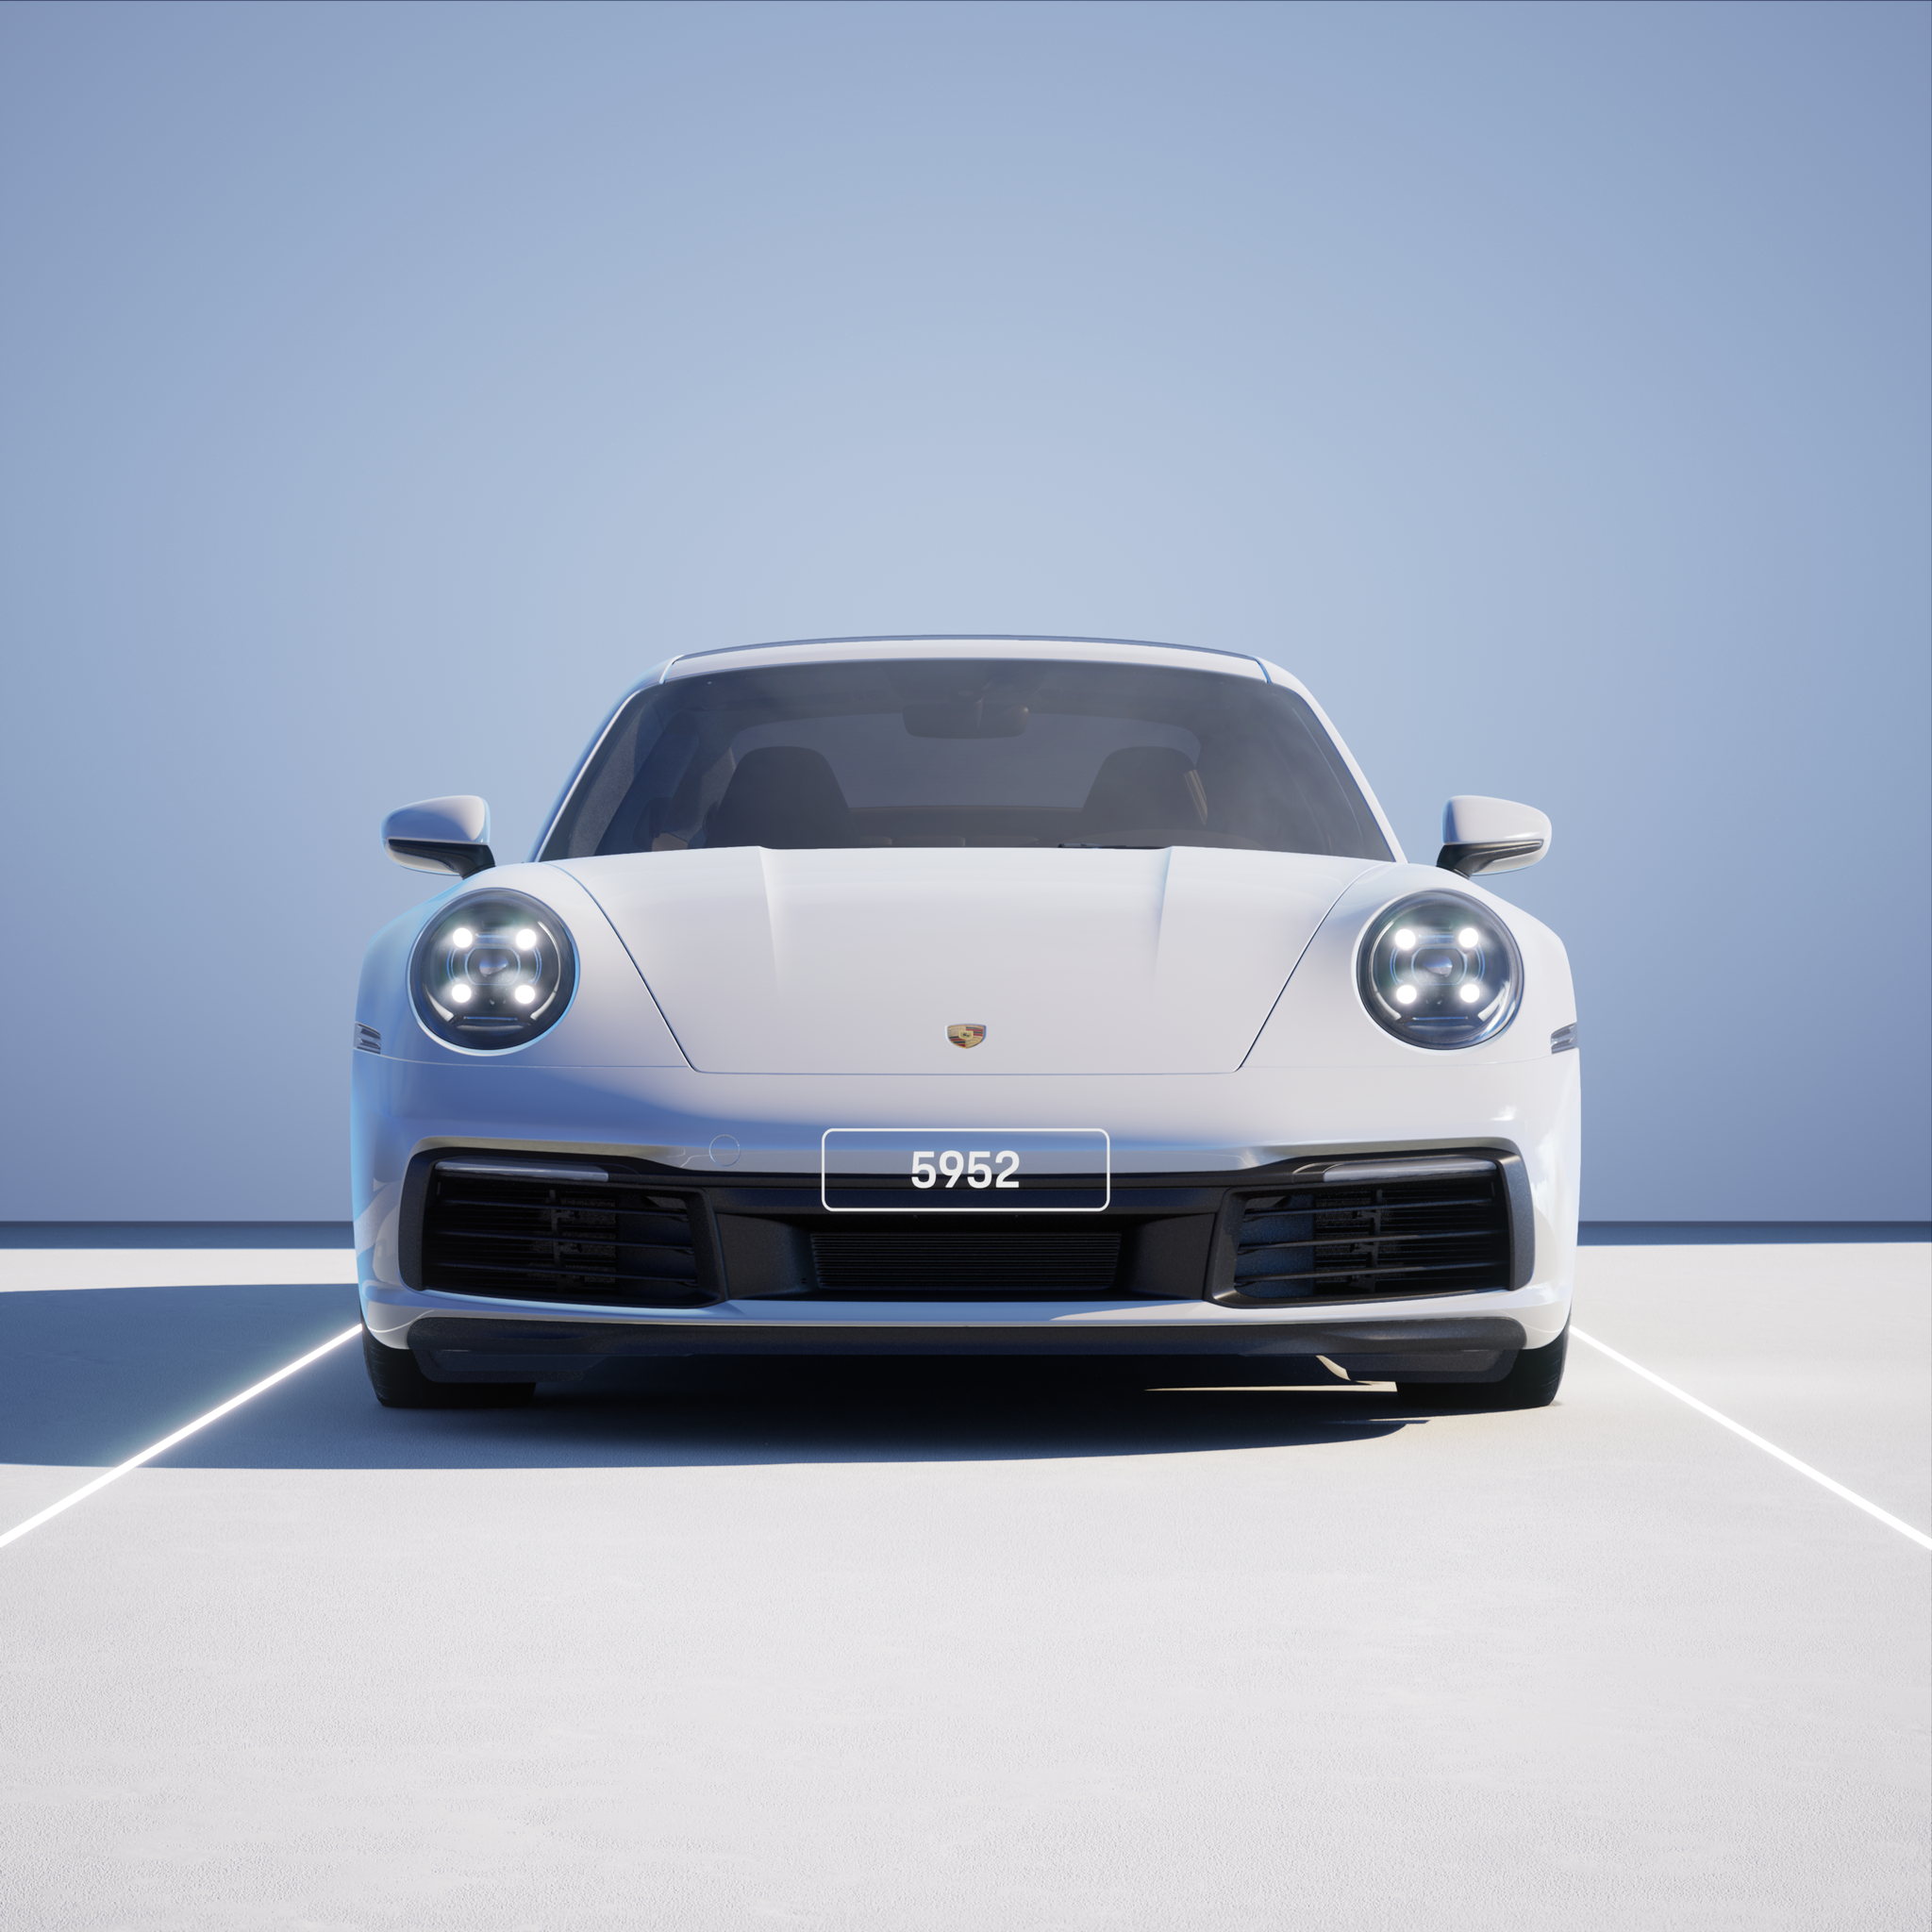 The PORSCHΞ 911 5952 image in phase